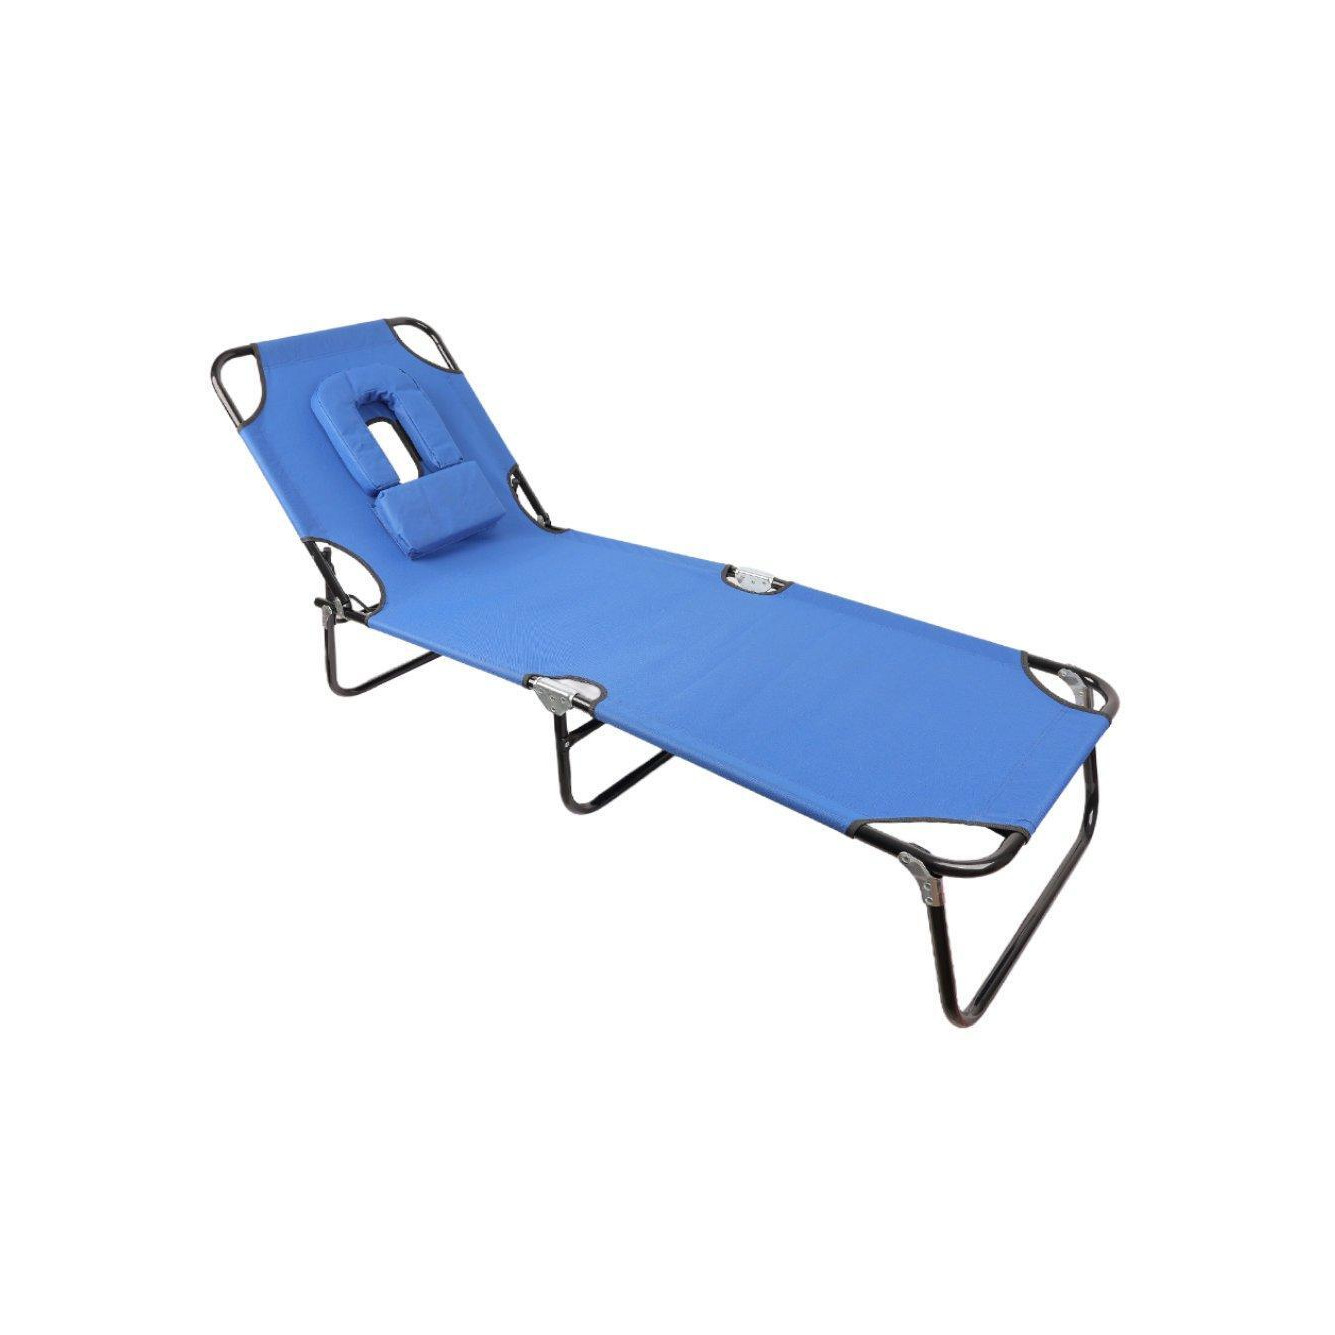 Garden sun lounger with Padded Headrest and Face Hole - image 1